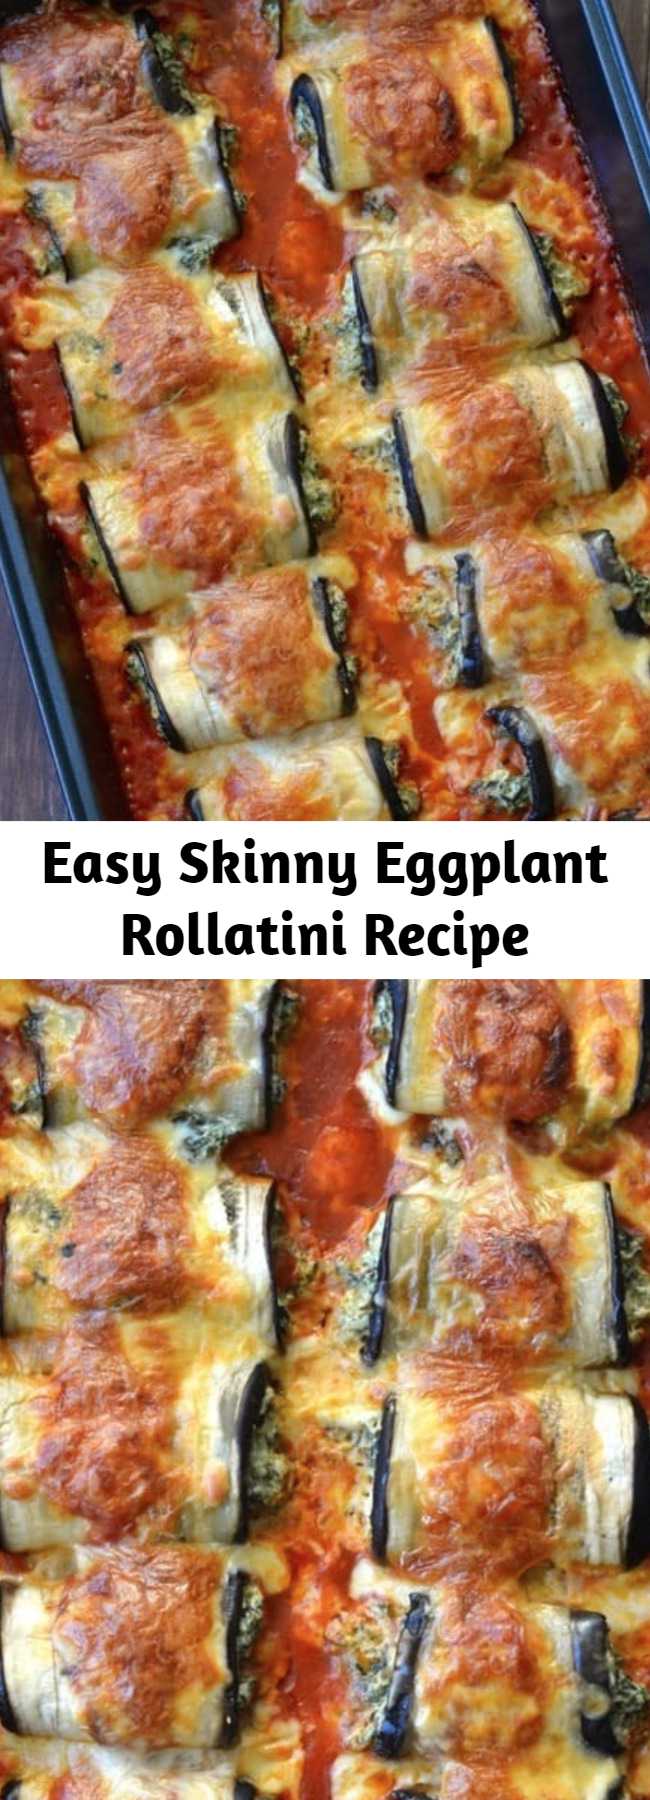 Easy Skinny Eggplant Rollatini Recipe - Sliced eggplants stuffed with Italian cheese and spinach, then rolled up and baked until tender with loads of melted cheese on top. These guilt-free Skinny Eggplant Rollatini are scrumptious, gluten free and low carb!